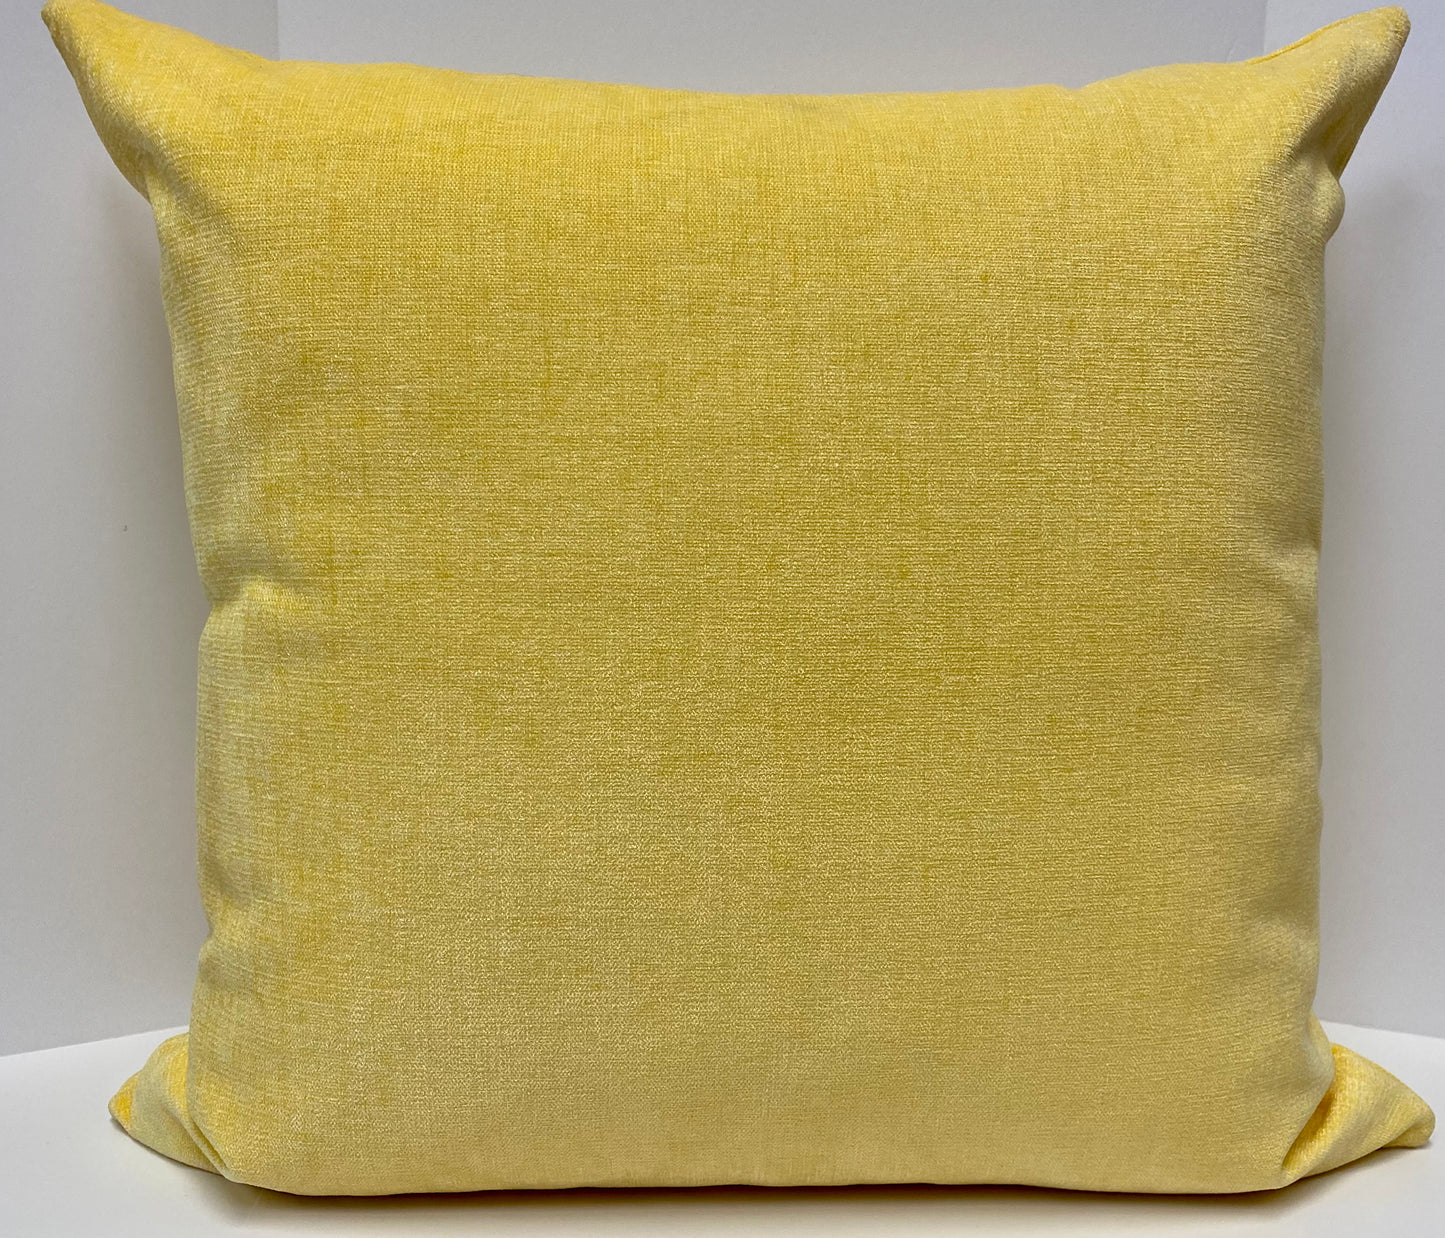 Luxury Pillow -  24" x 24" - Lemon Zest; Bright Yellow Solid Front and Back